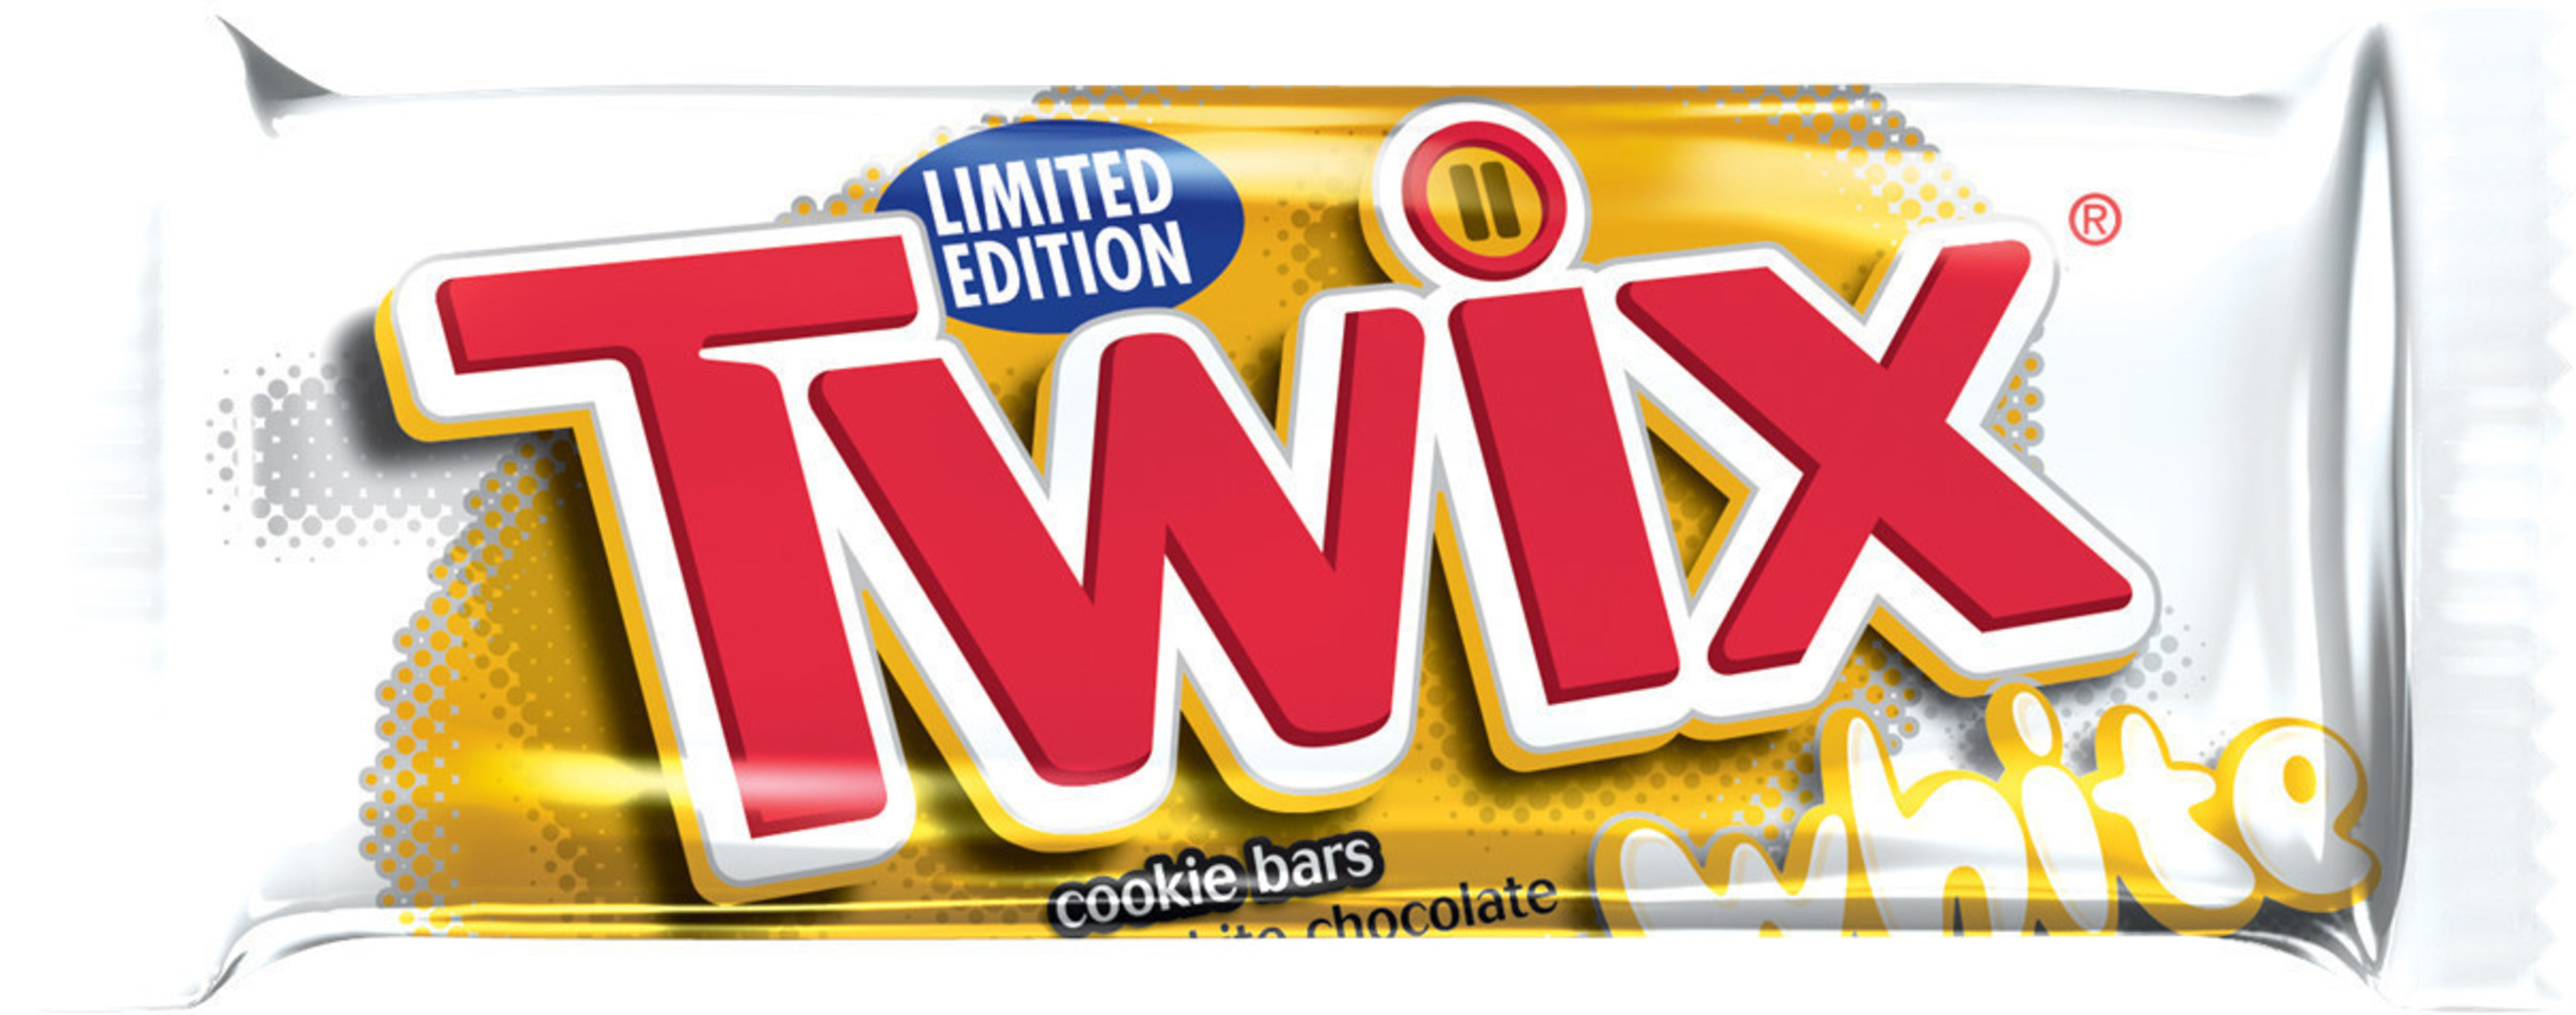 TWIX(R) White Chocolate Cookie Bars feature two crunchy cookie bars covered with smooth caramel and enrobed in creamy white chocolate. Available in October 2016, this limited edition item is sure to please, as white chocolate continues to grow in popularity.